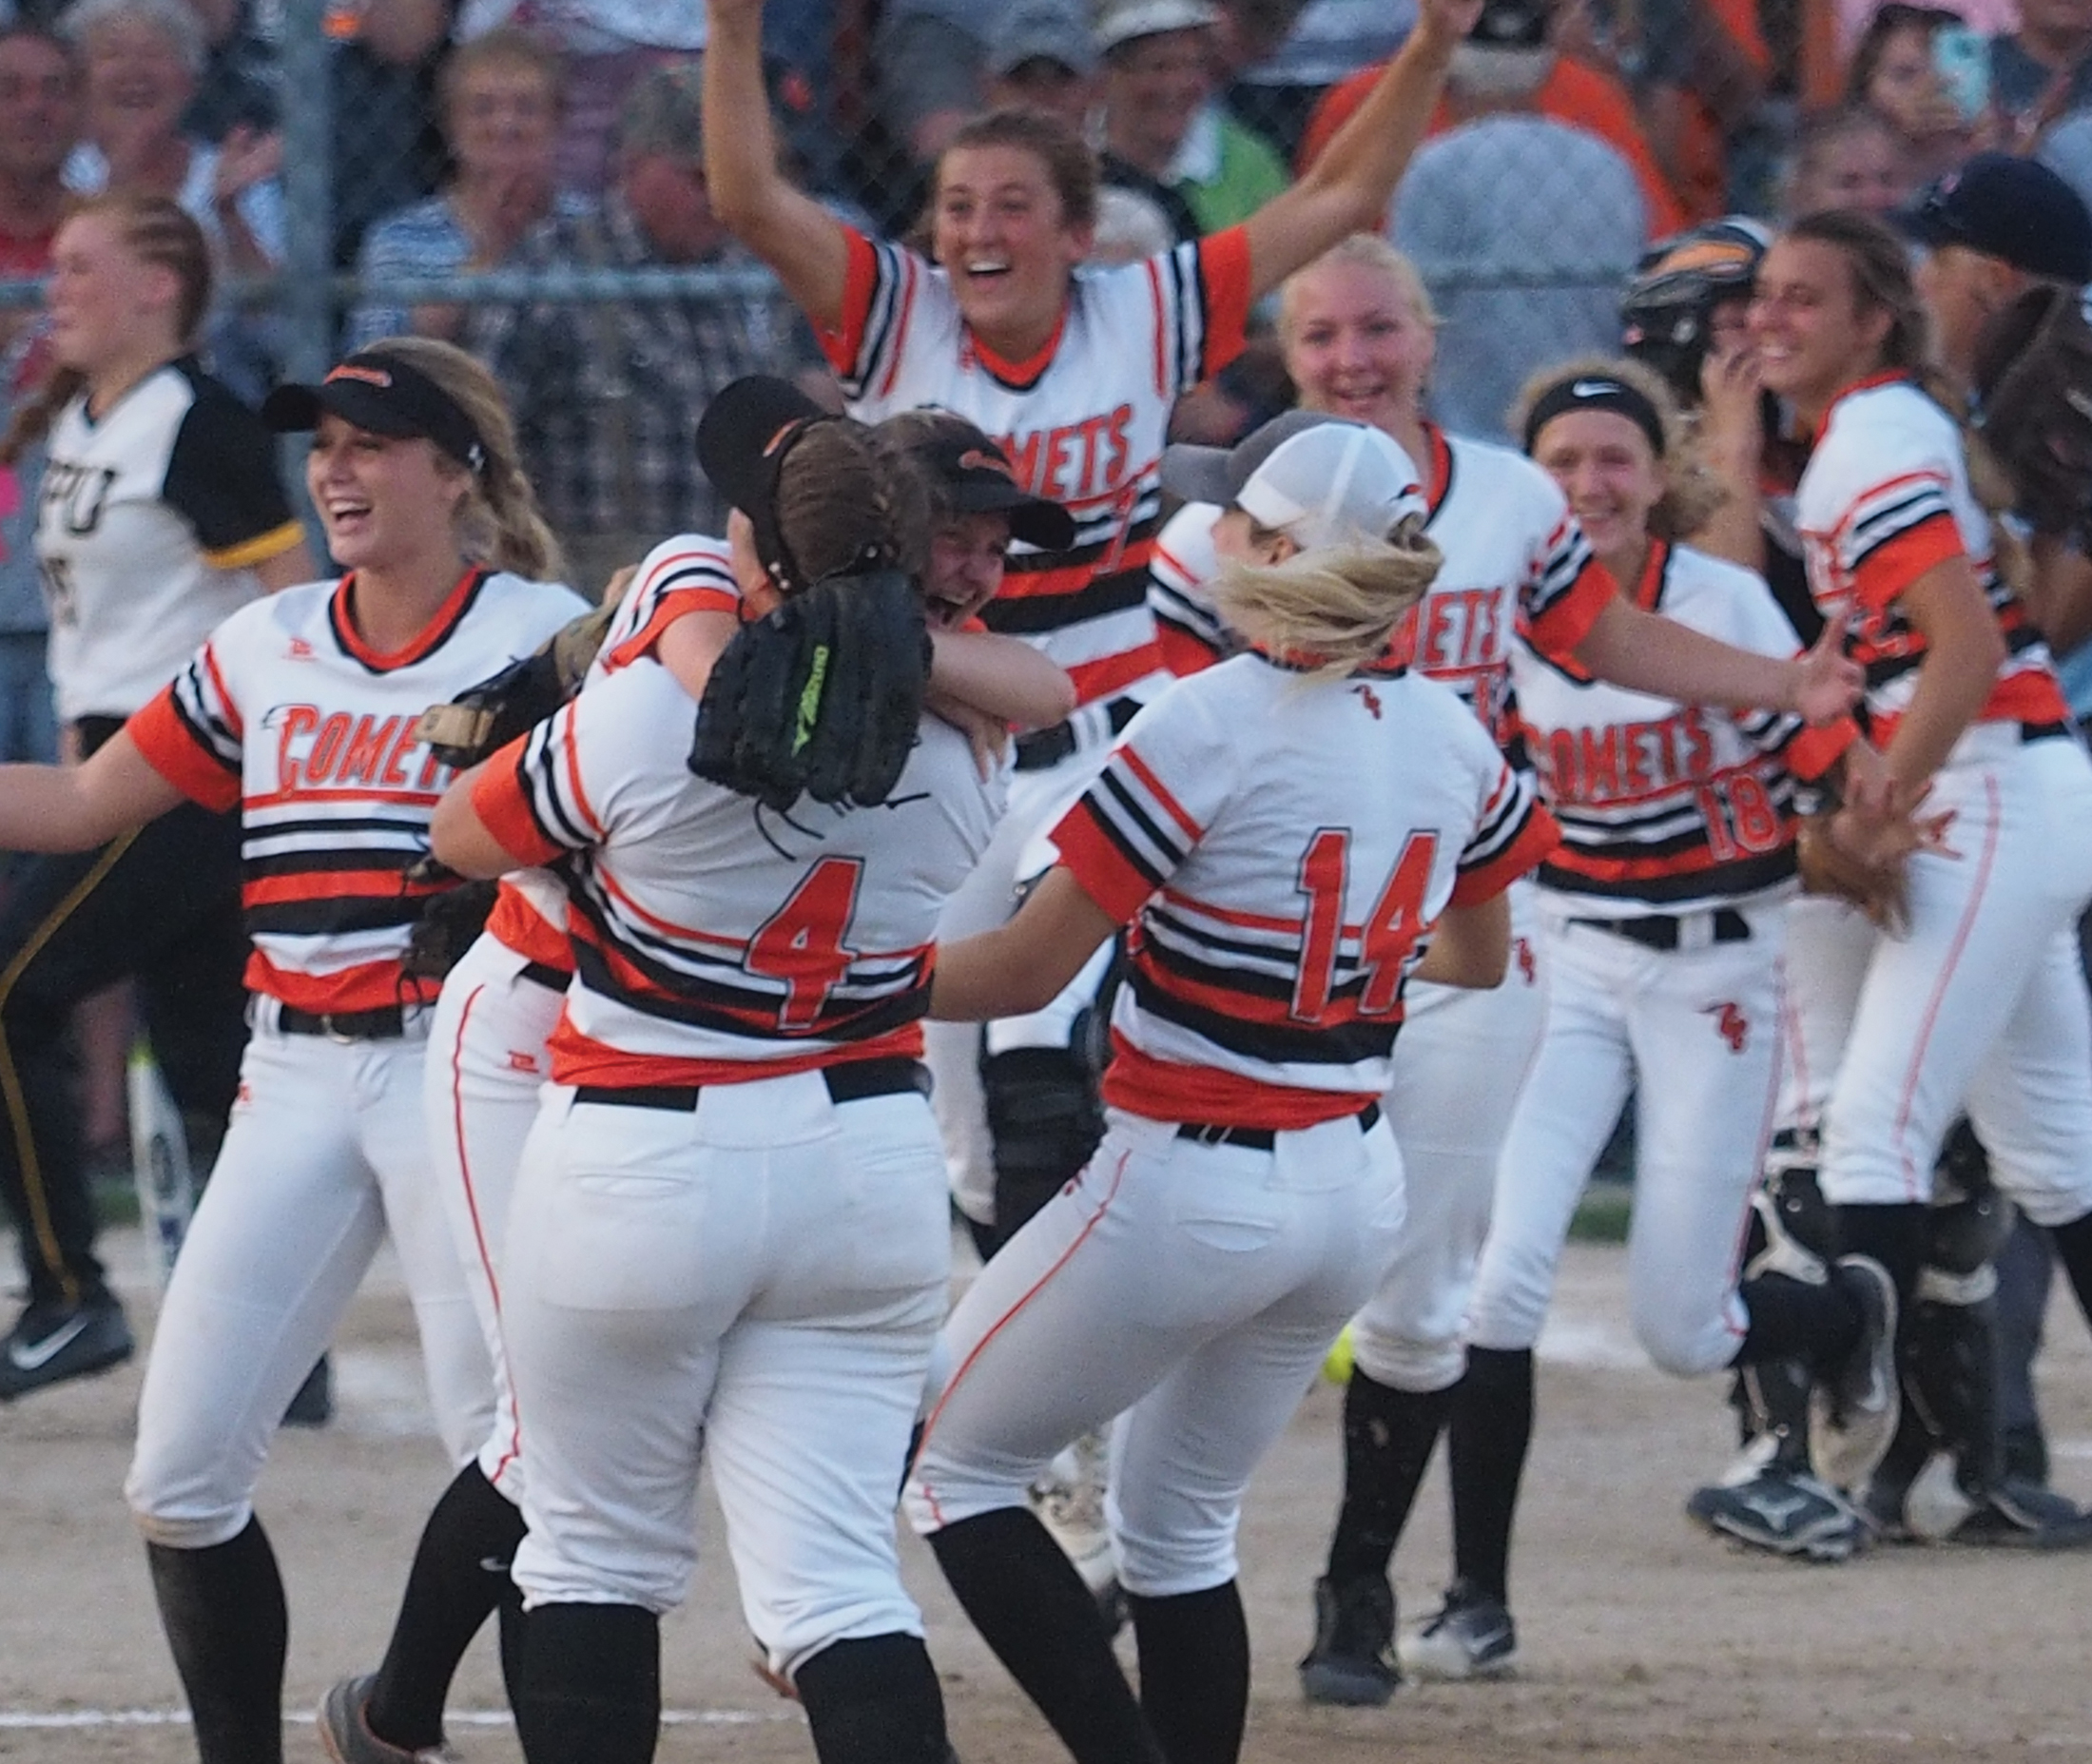 Comets defeat CPU, 6-1, in regional final; advance to state for 27th time